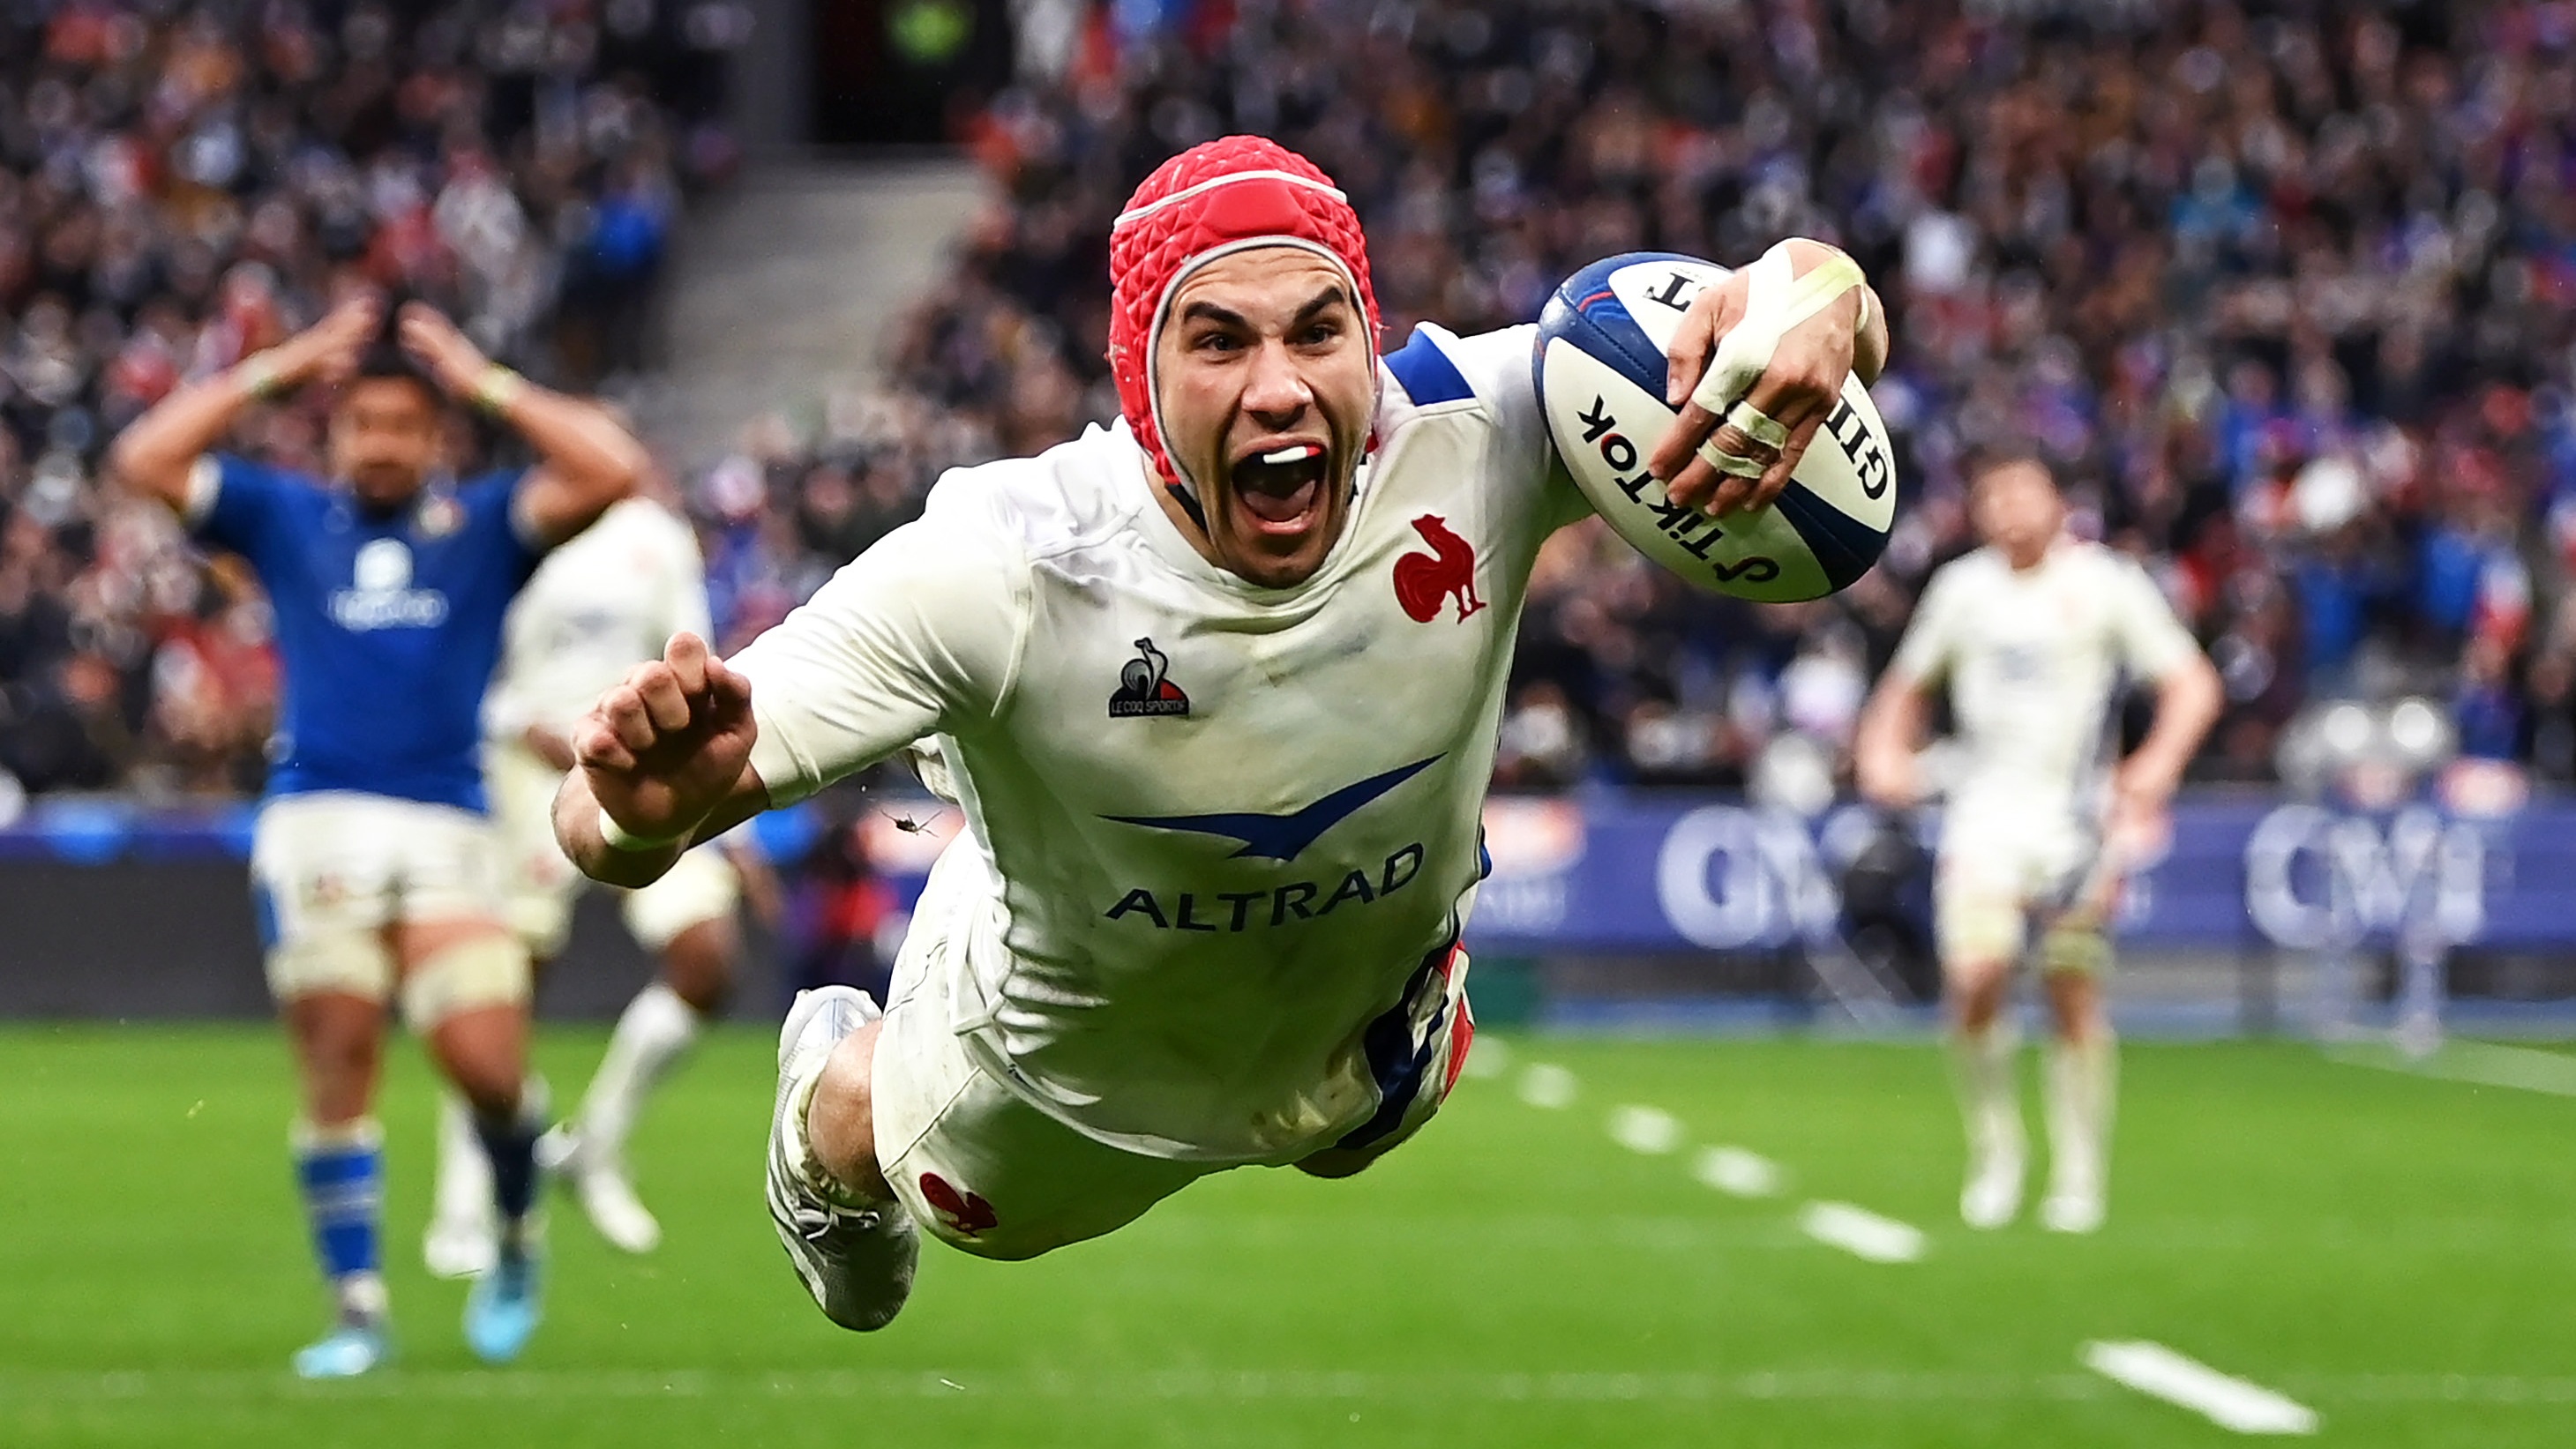 rugby online games free six nations